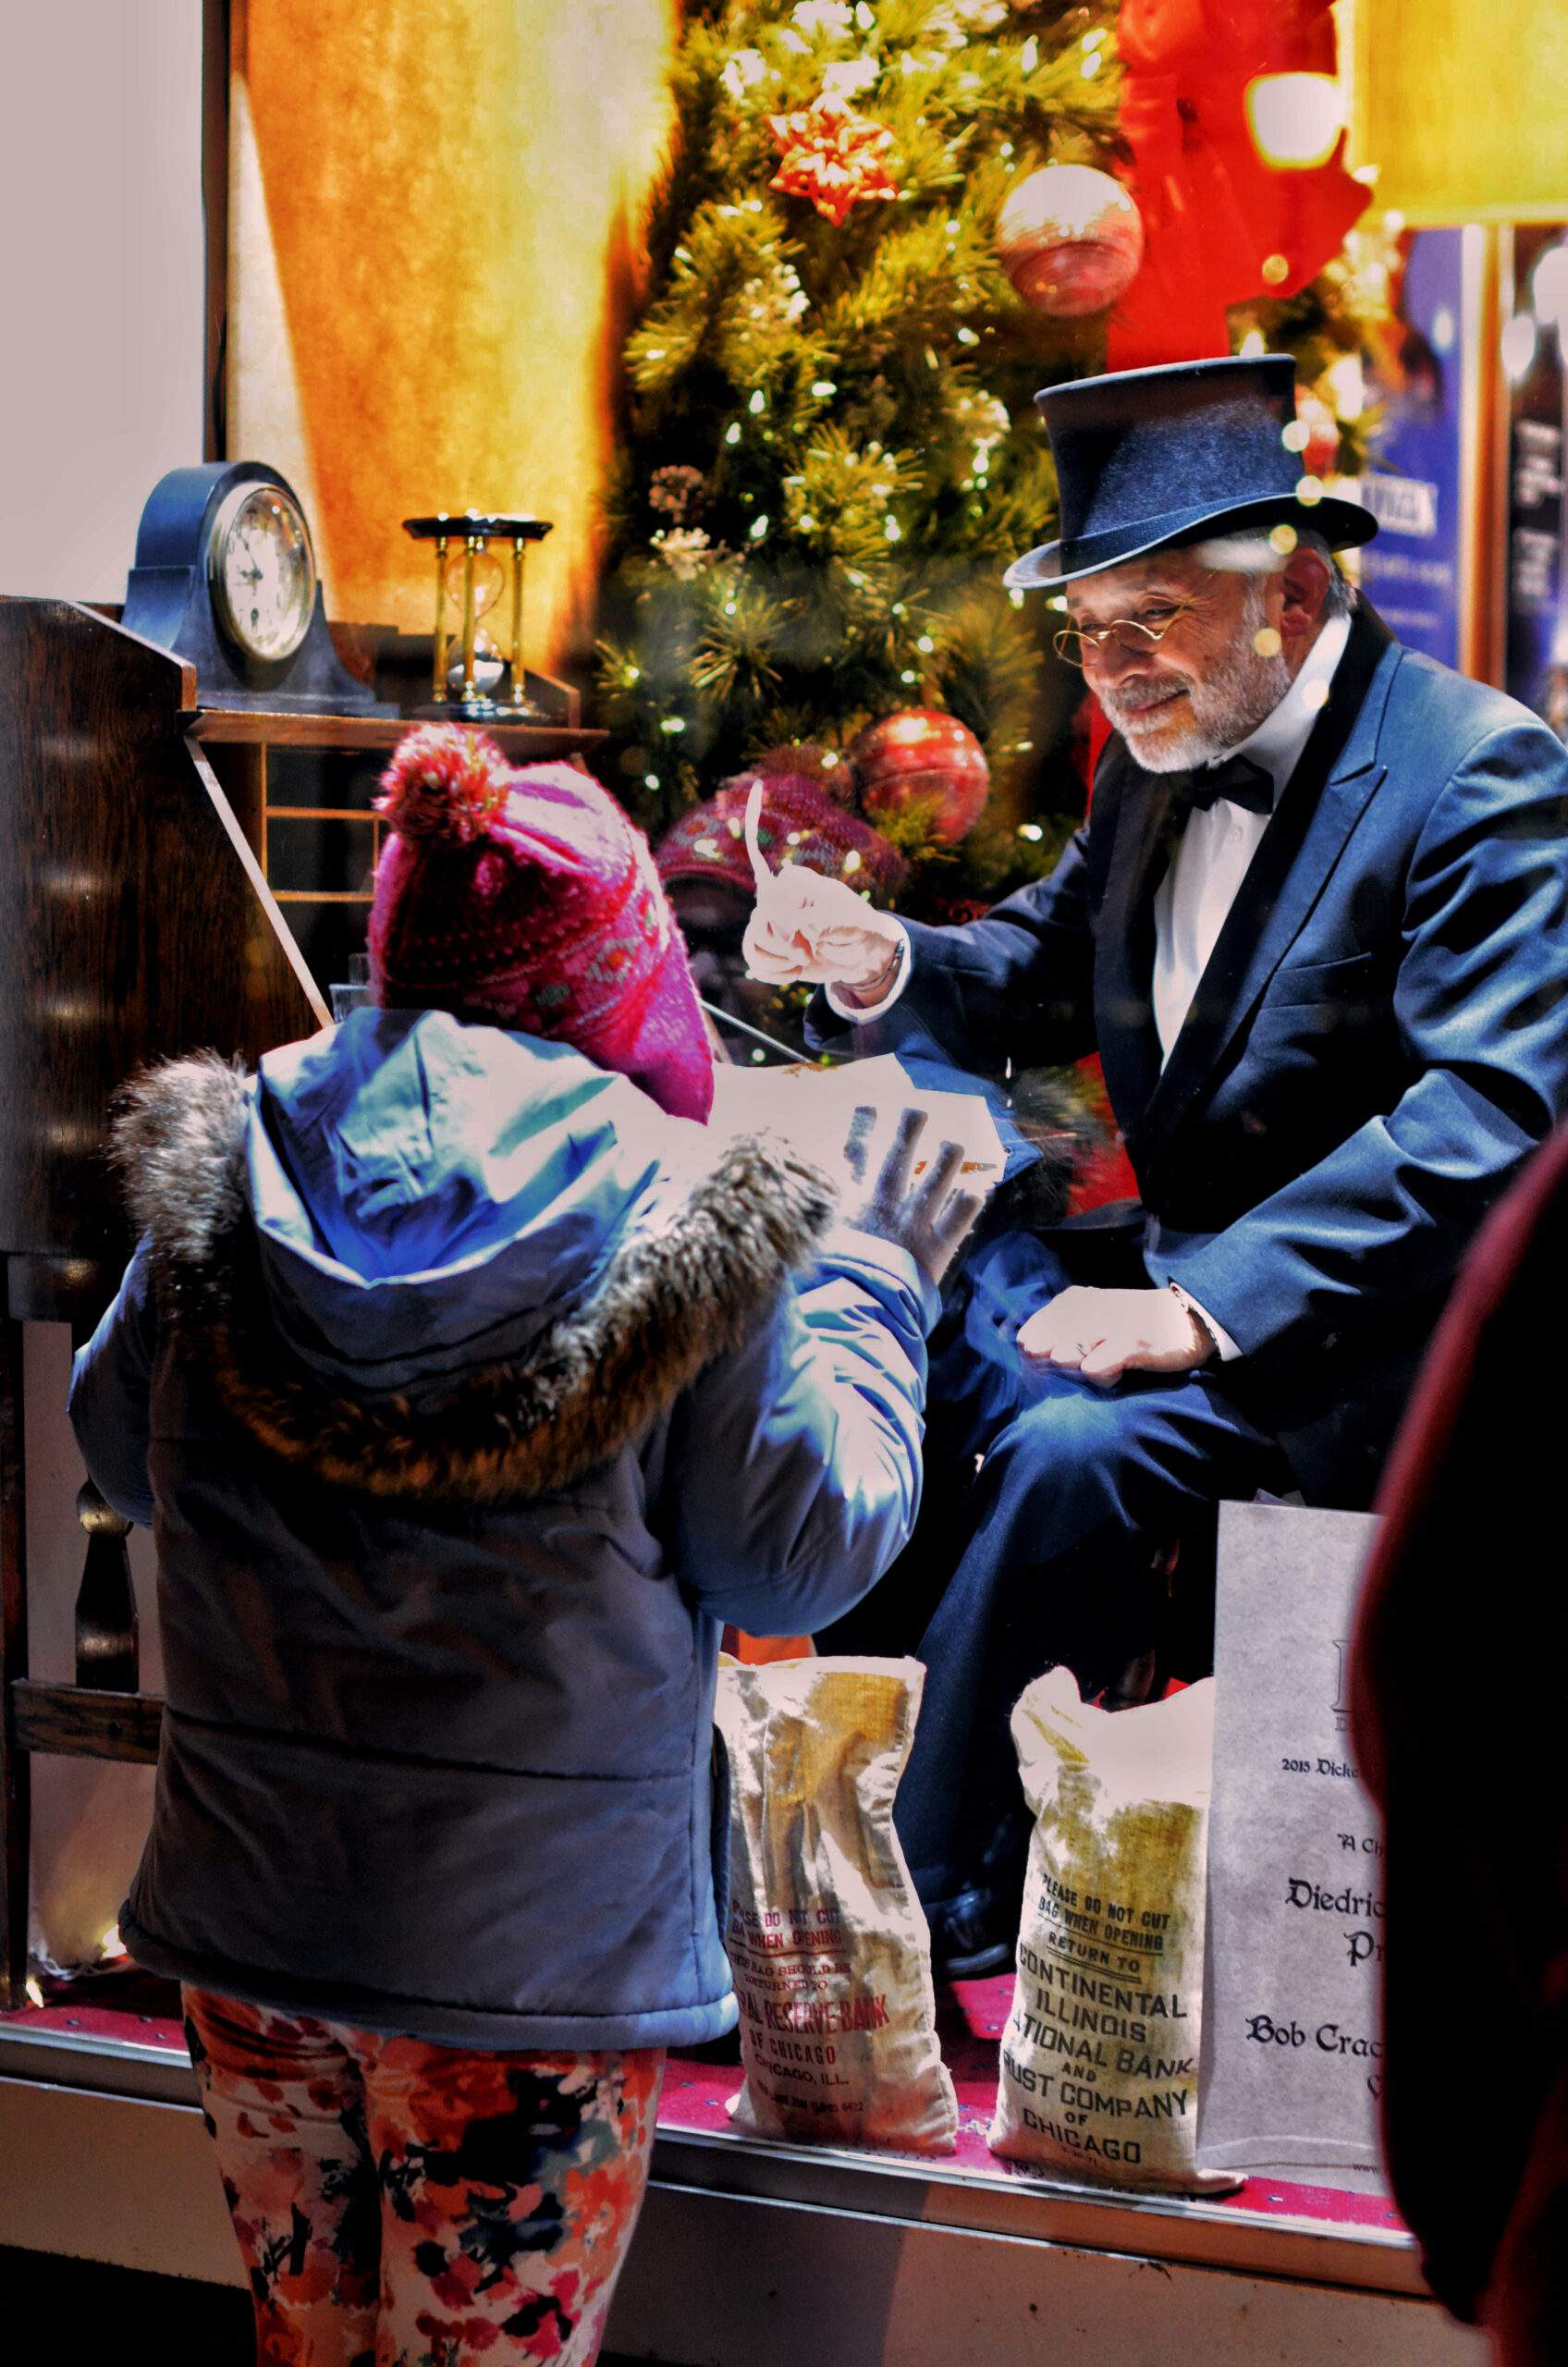 Man in tuxedo and top hat interacts with child in winter hat and jacket